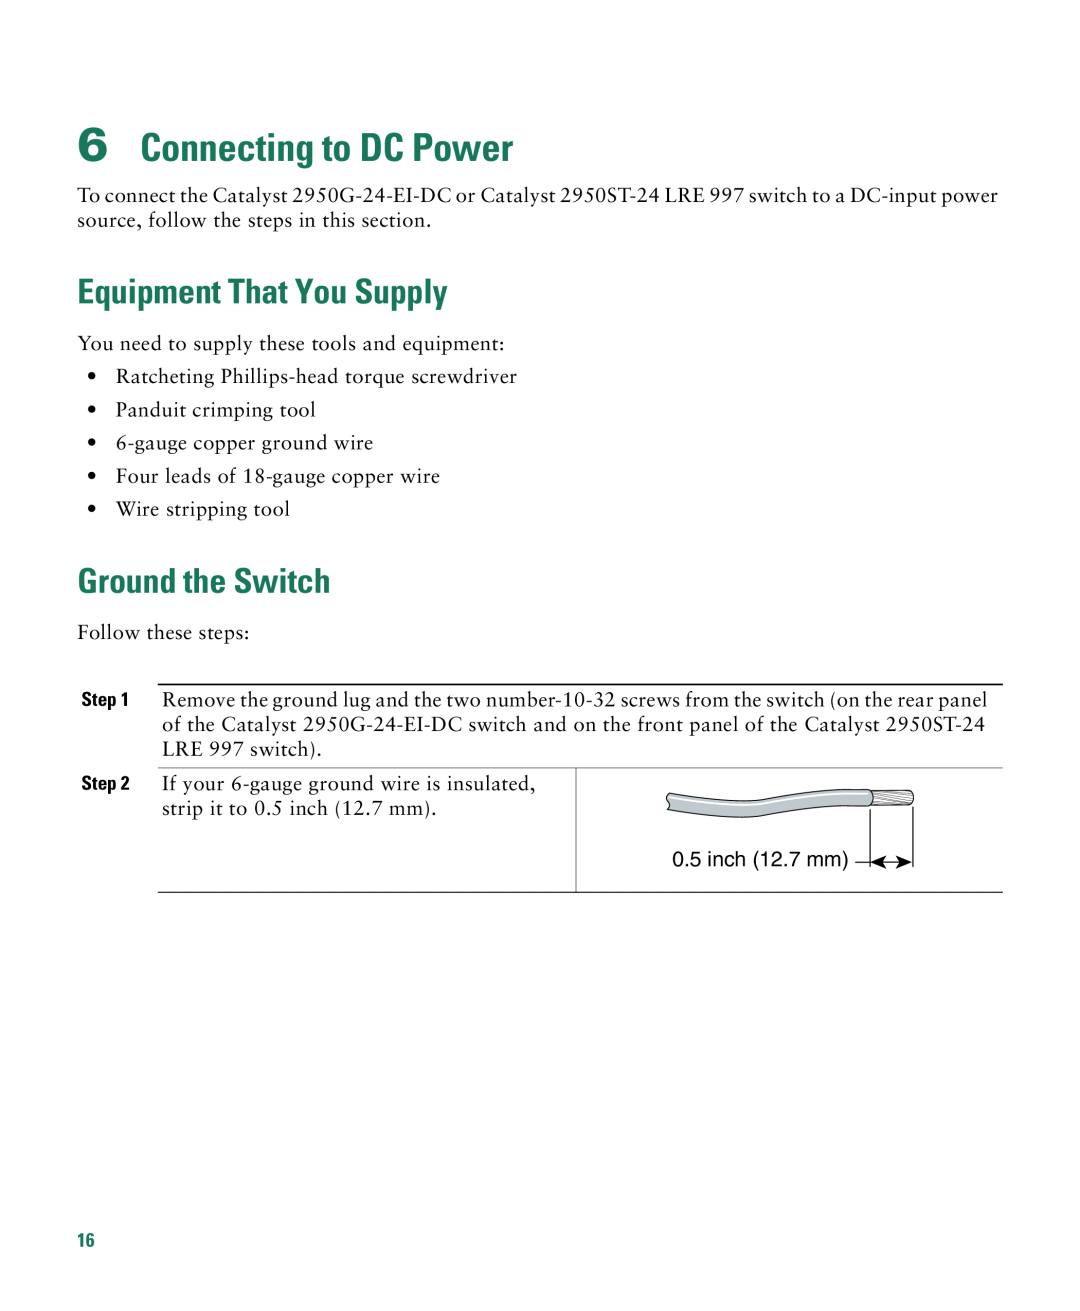 Cisco Systems CATALYST 2950 manual Connecting to DC Power, Ground the Switch, Equipment That You Supply, inch 12.7 mm 